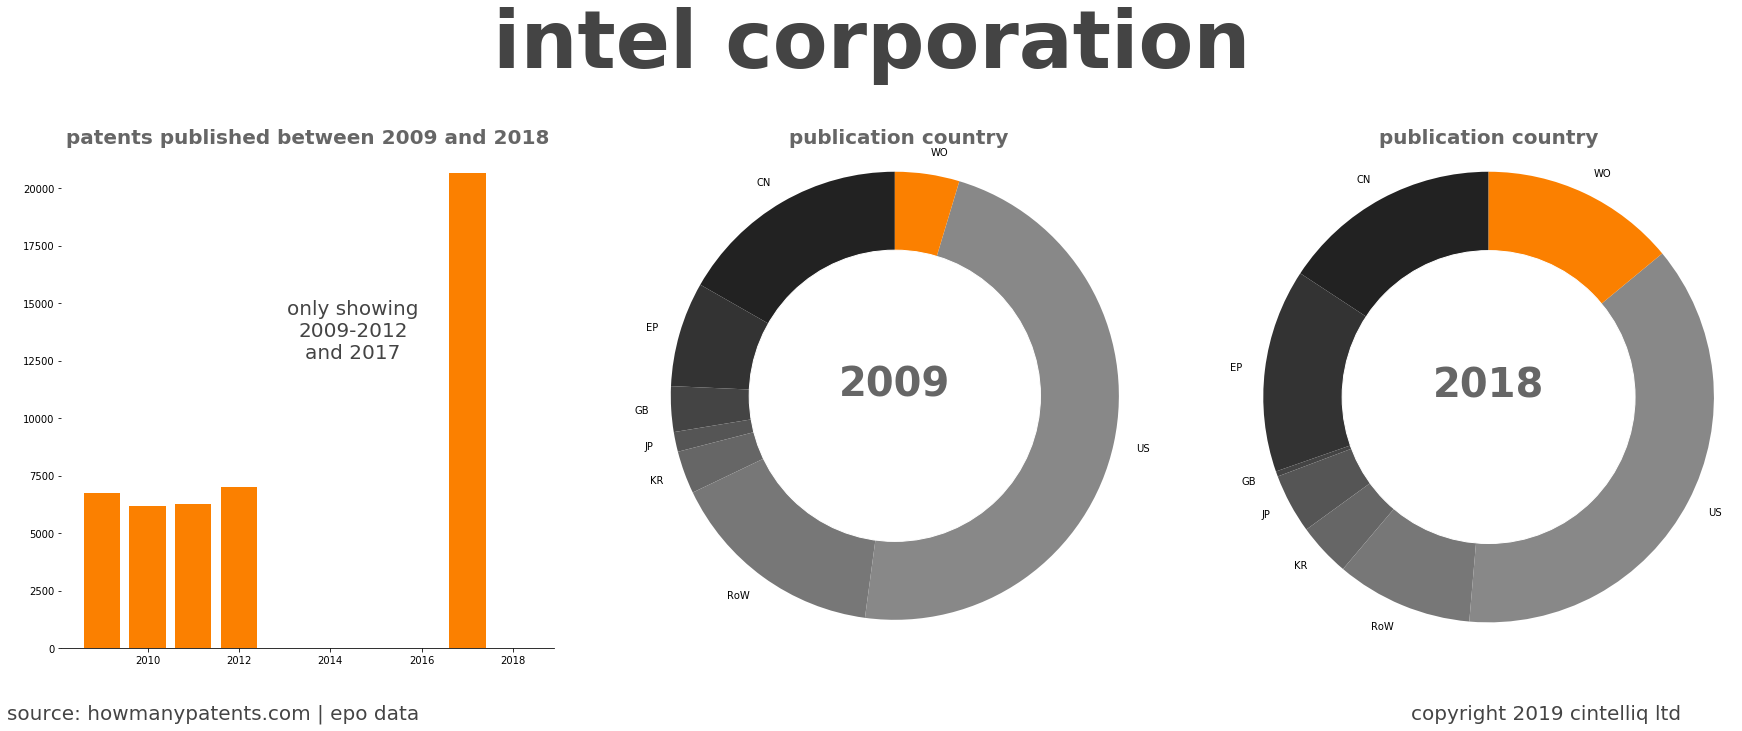 summary of patents for Intel Corporation